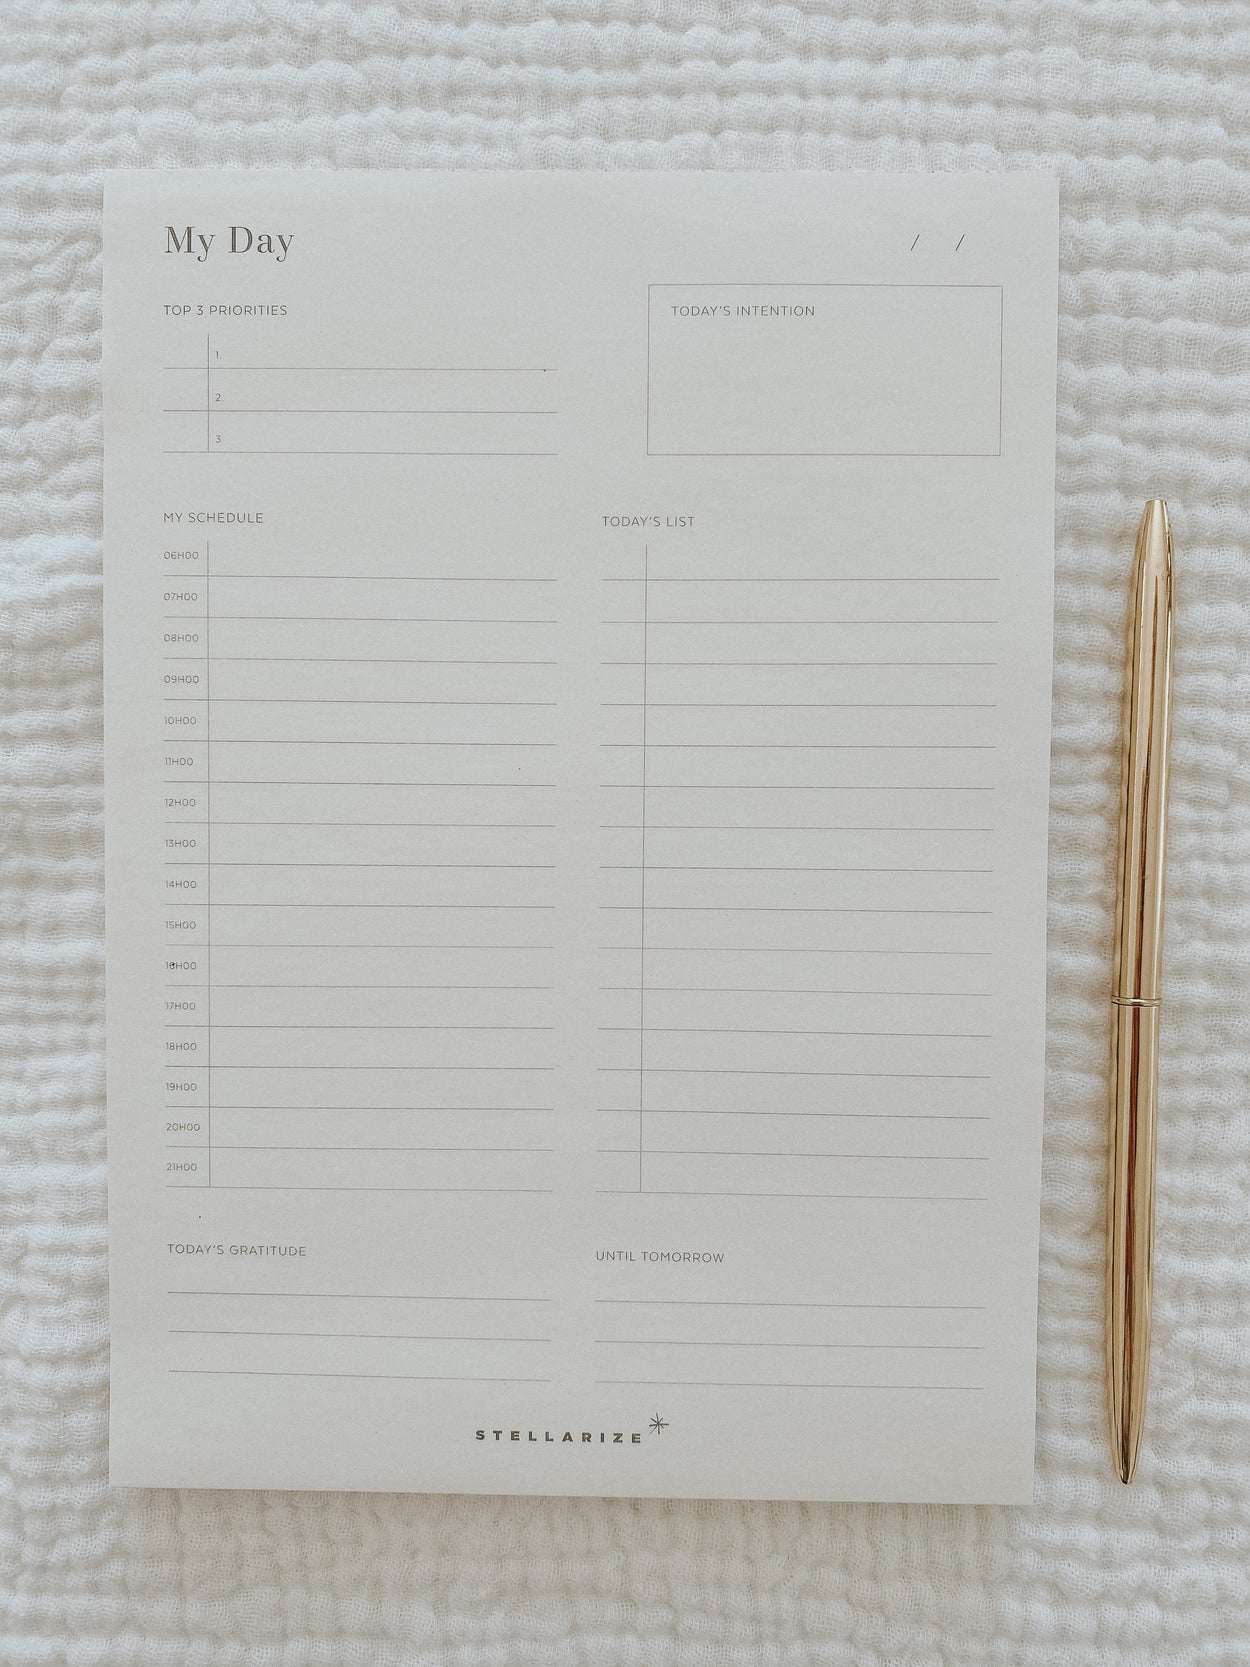 The Day Planner